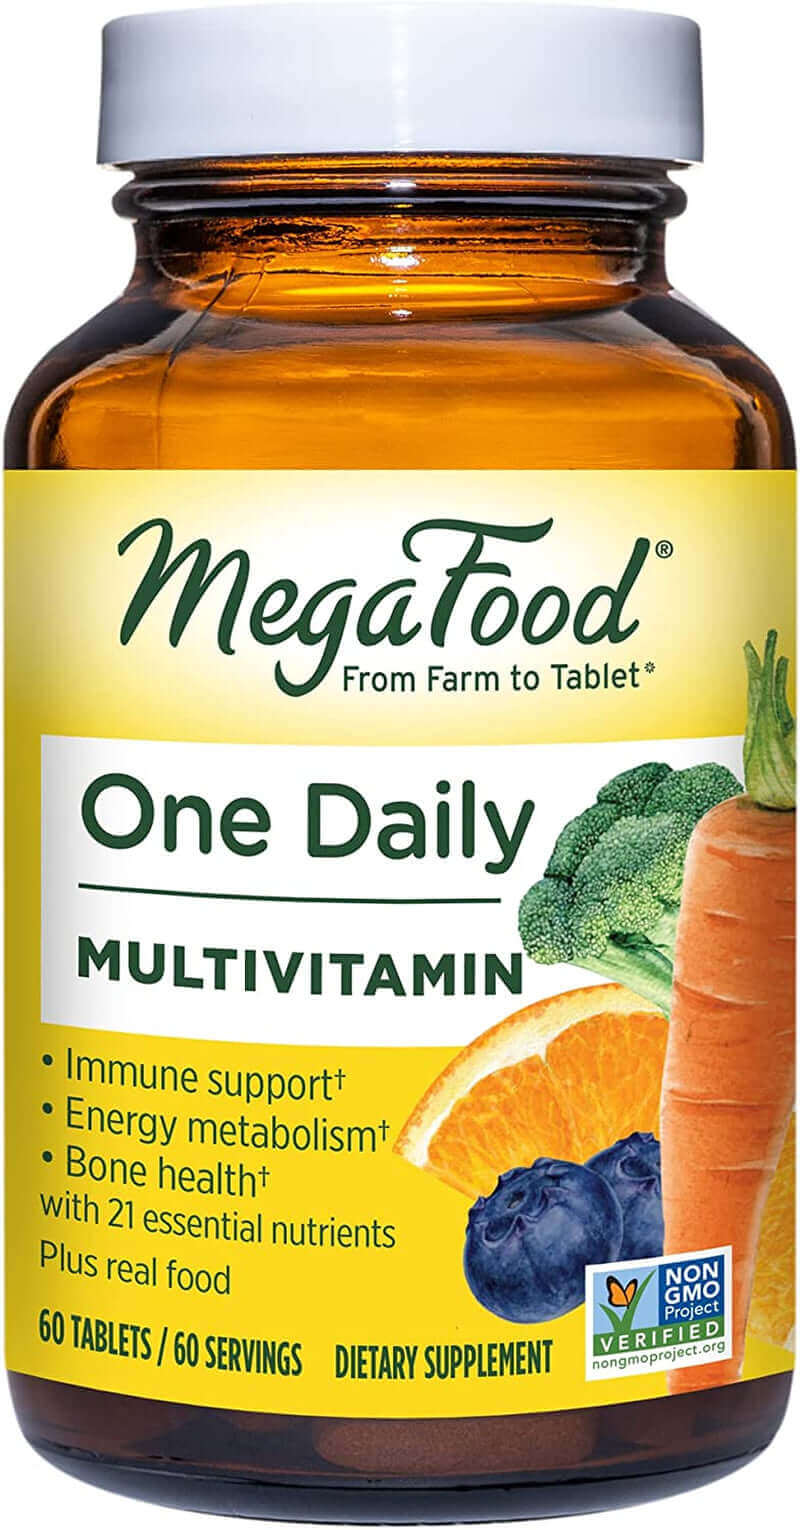 Megafood One Daily - Supports Overall Health - Multivitamin with B Vitamins and Food Blend - Gluten-Free, Vegetarian, and Made without Dairy - 60 Tabs - vitamenstore.com